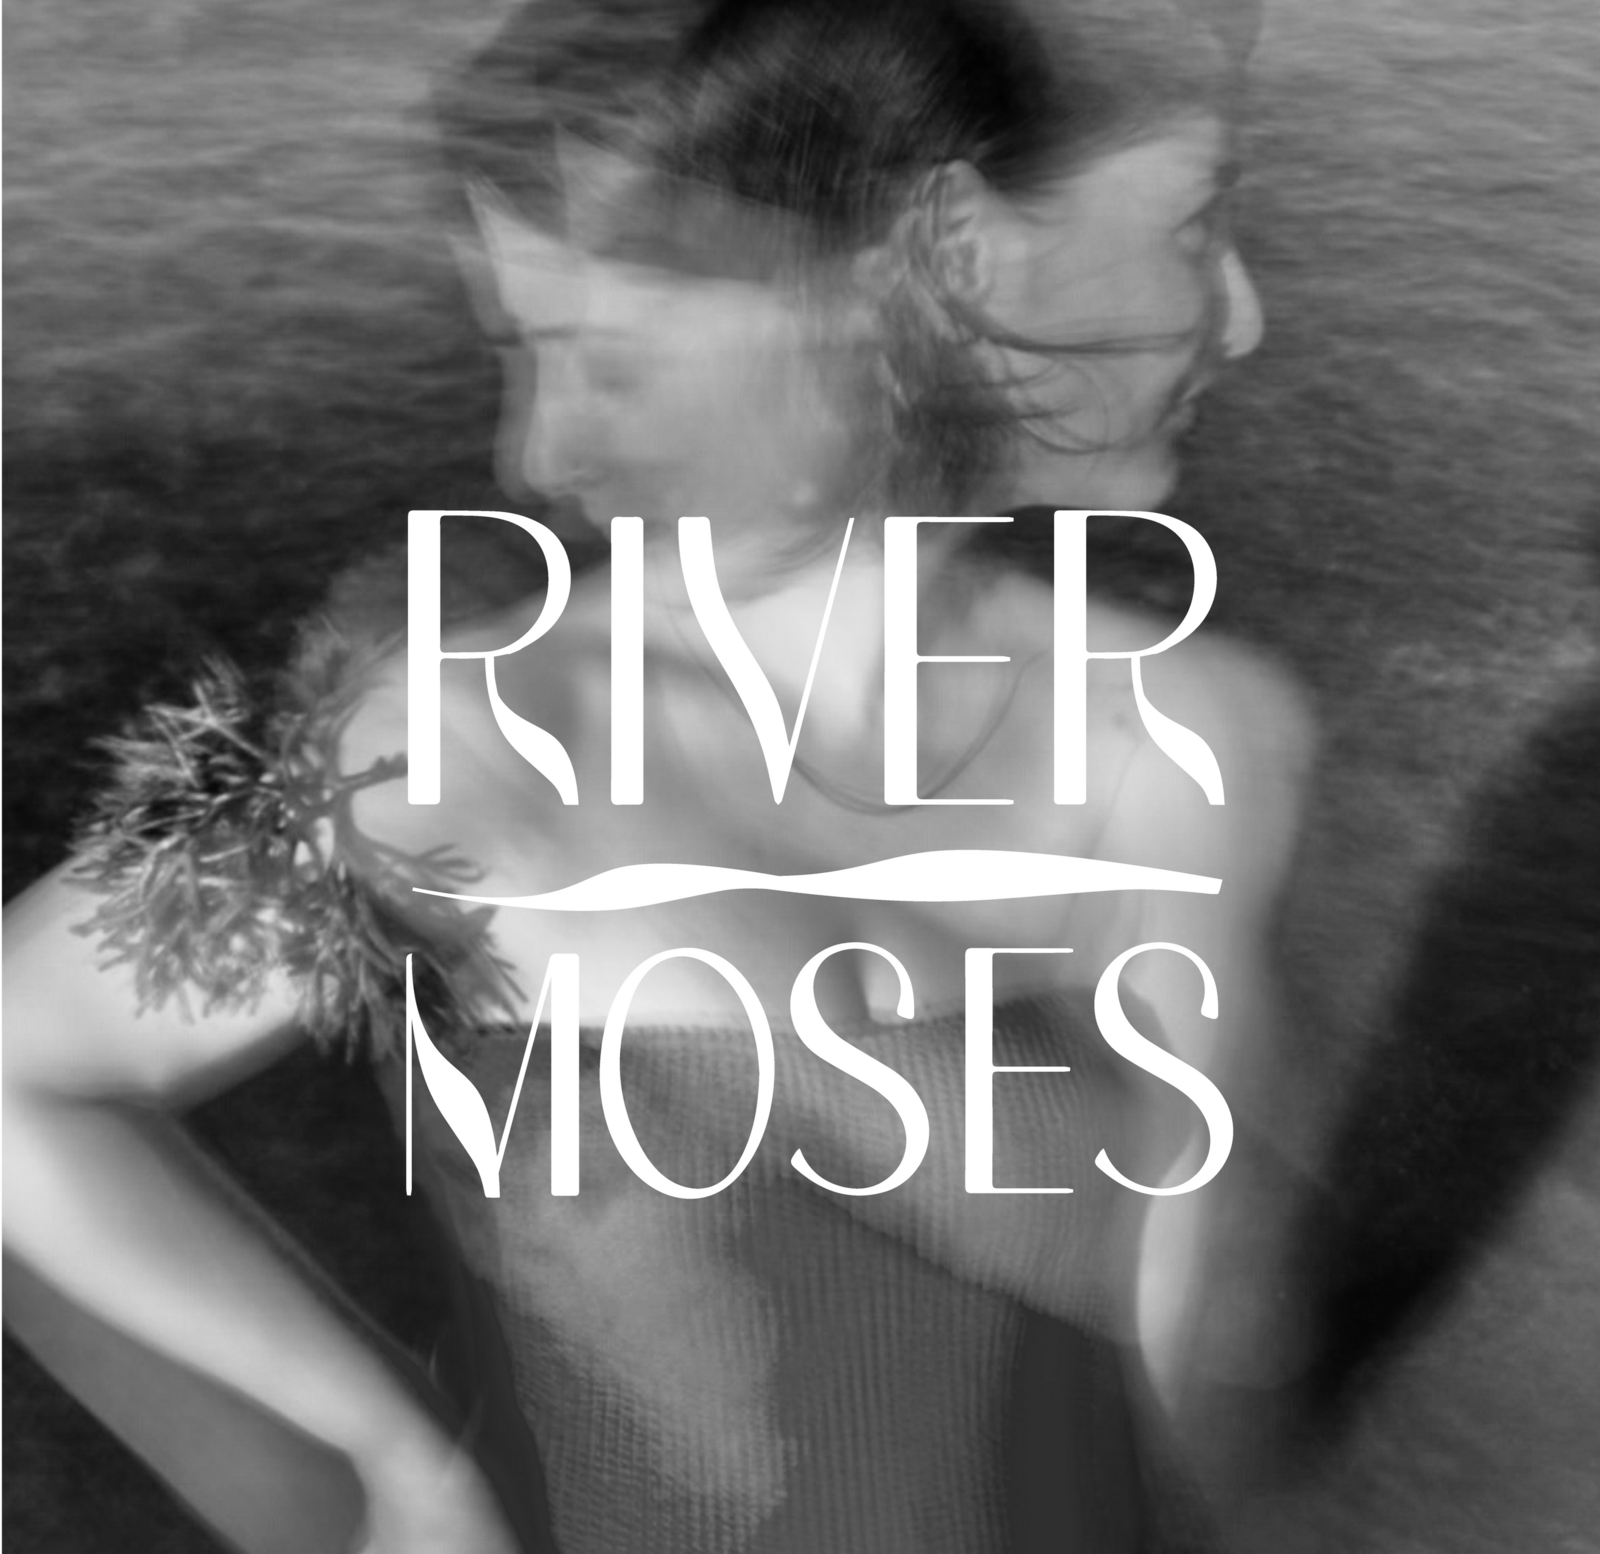 River Moses-15